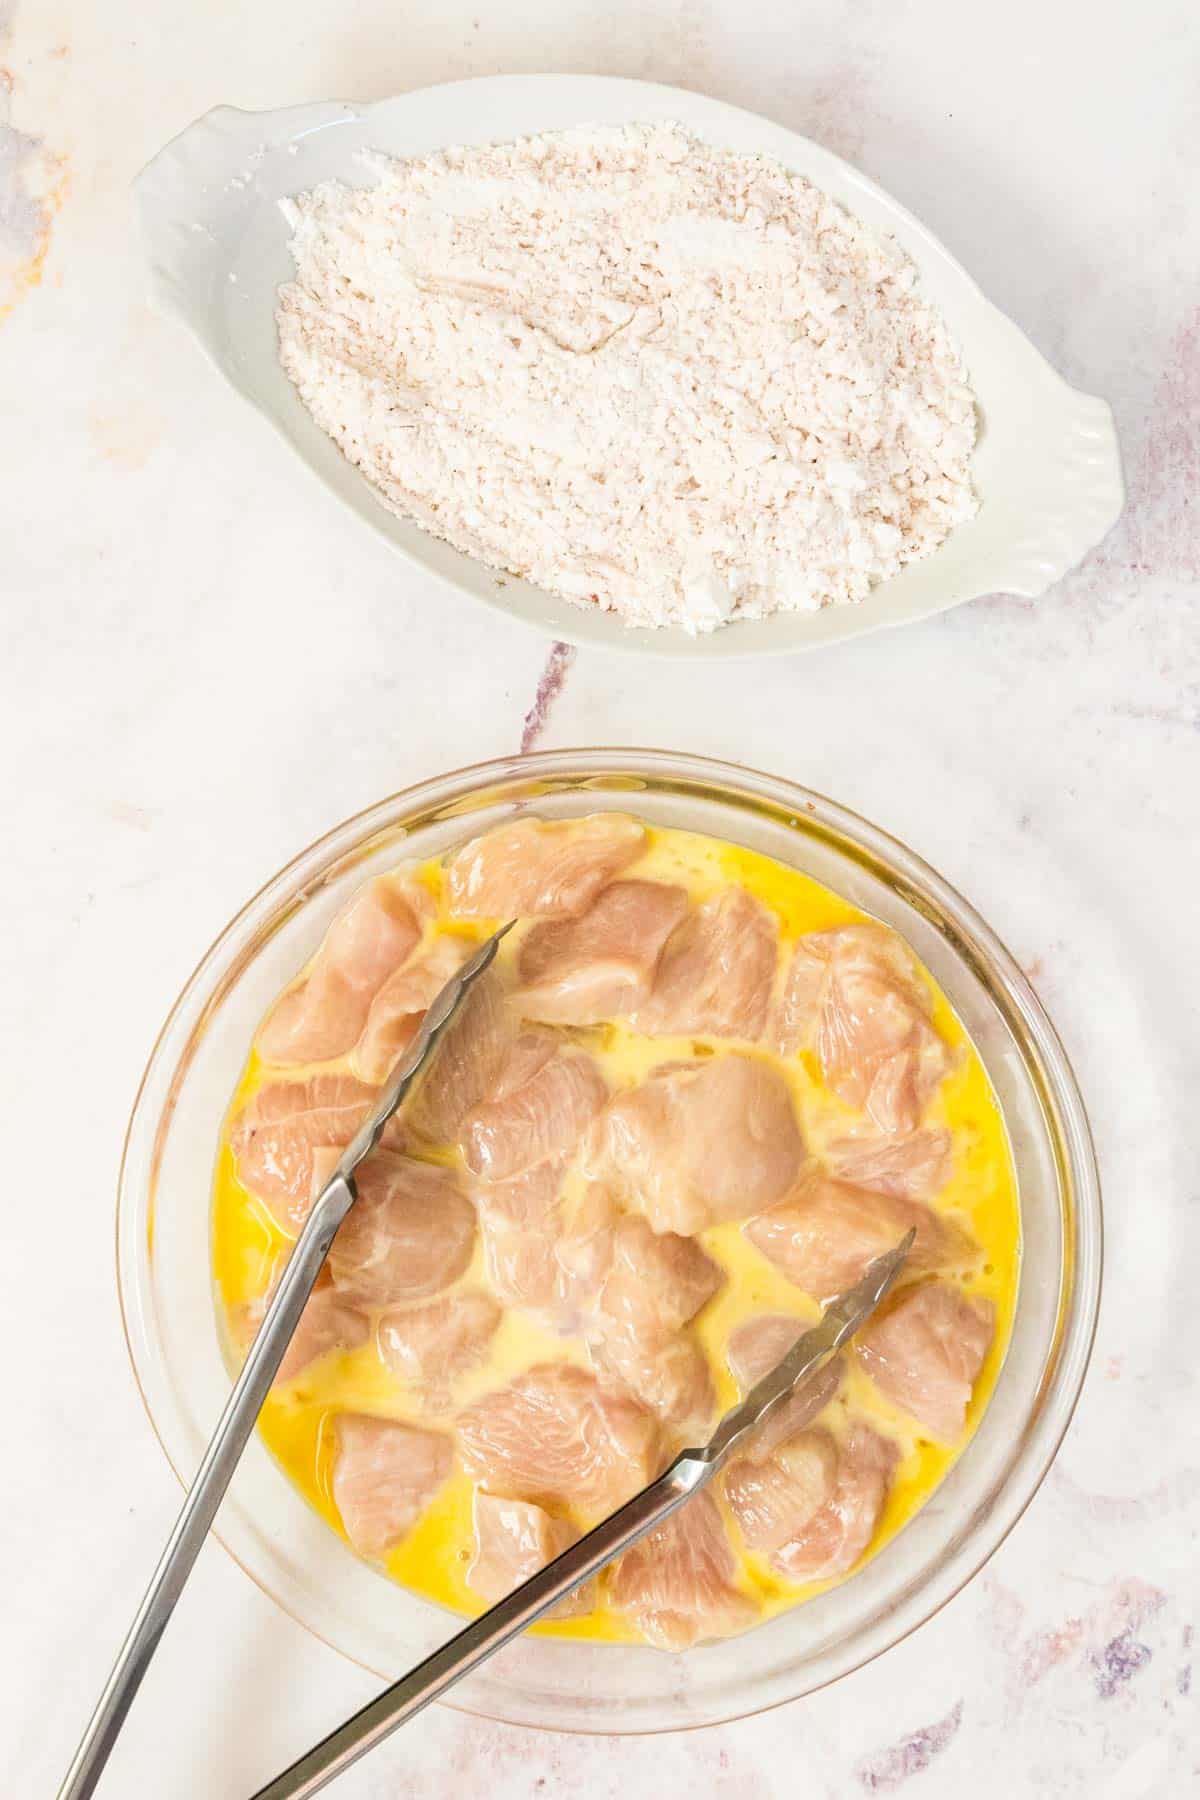 Marinated chicken pieces are placed in an egg wash for coating.